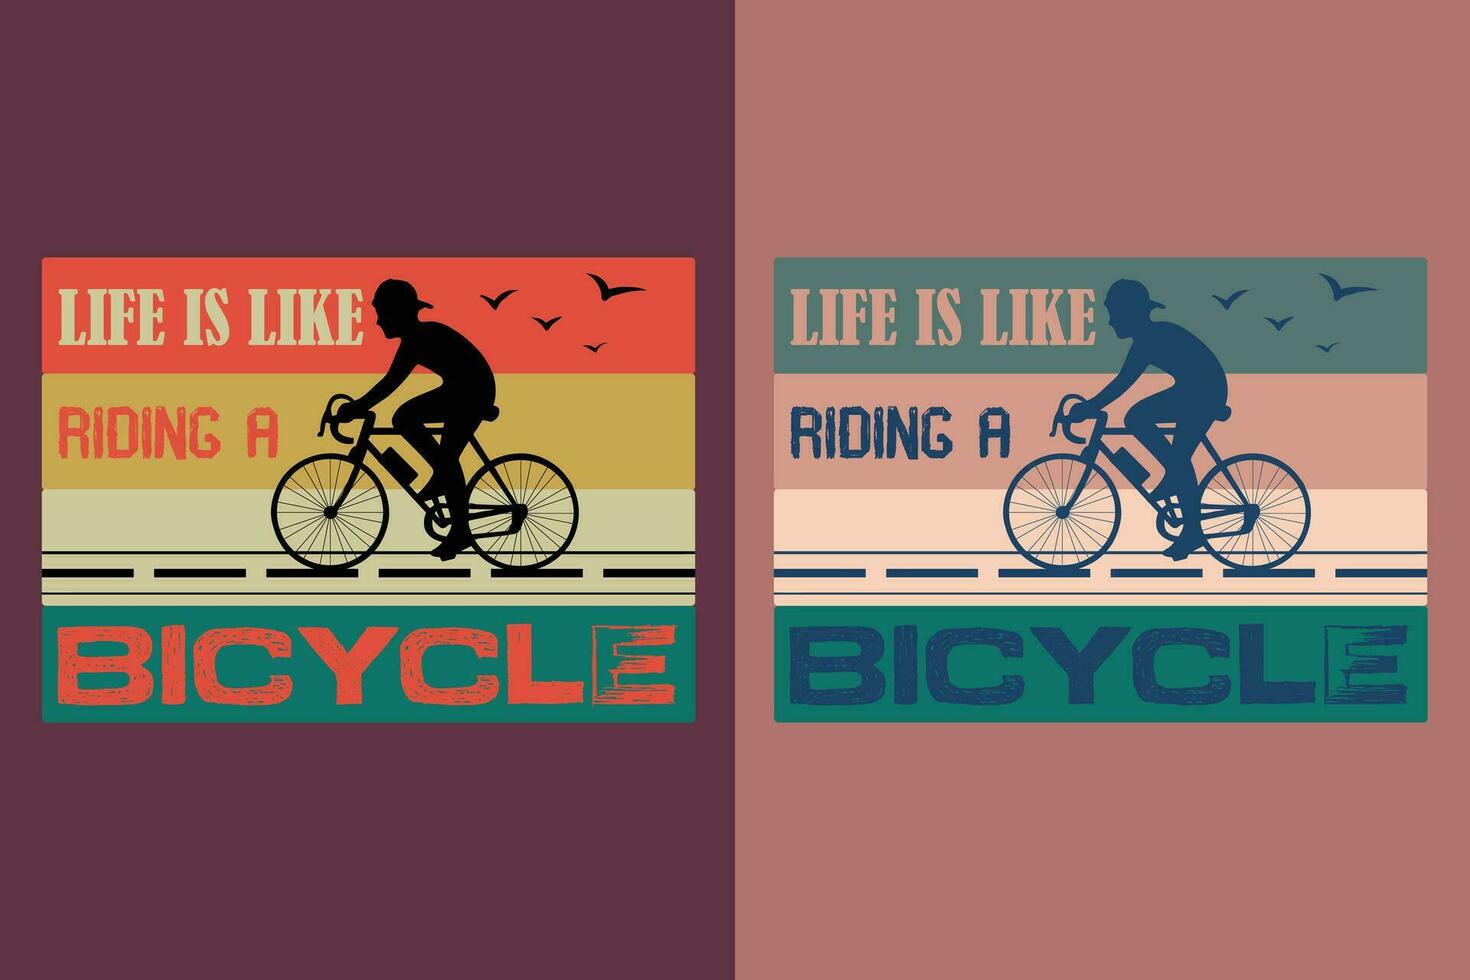 Life Is Like Riding A Bicycle, Bicycle Shirt, Gift for Bike Ride, Cyclist Gift, Bicycle Clothing, Bike Lover Shirt, Cycling Shirt, Biking Gift, Biking Shirt vector